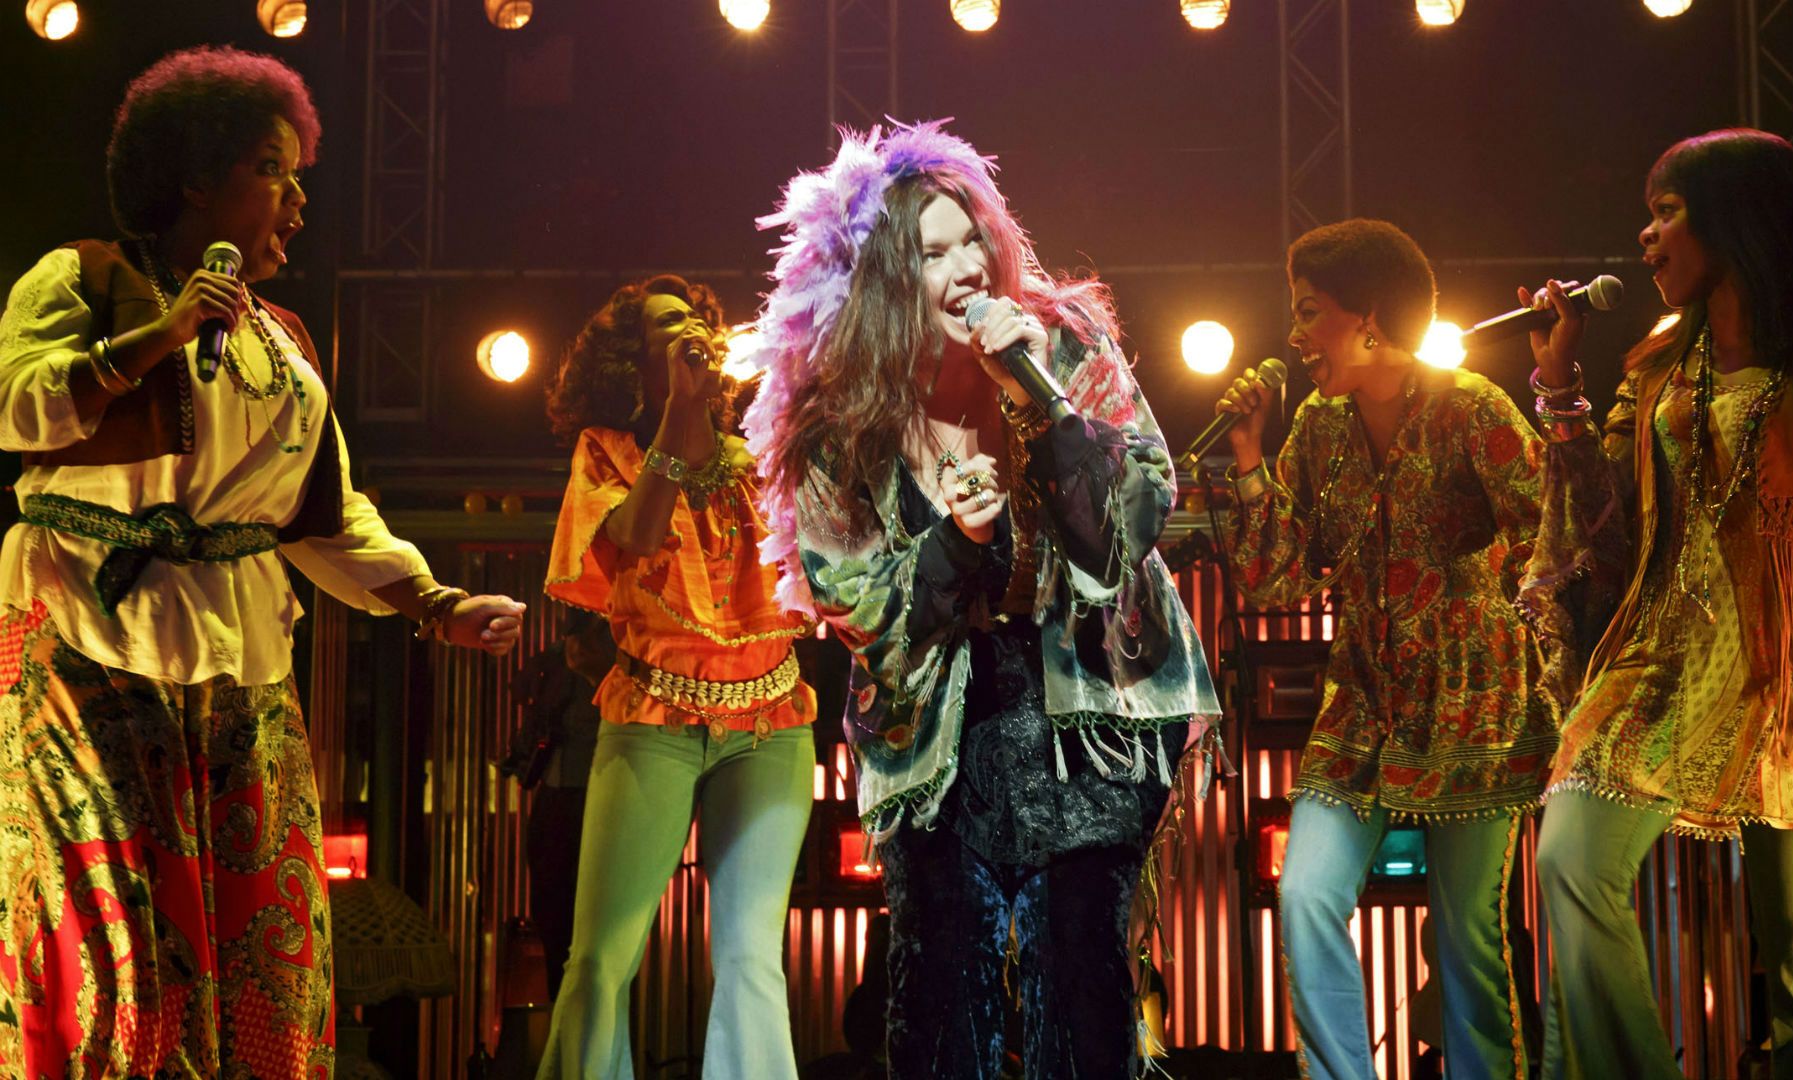 'A Night With Janis Joplin' will screen in movie theaters this November